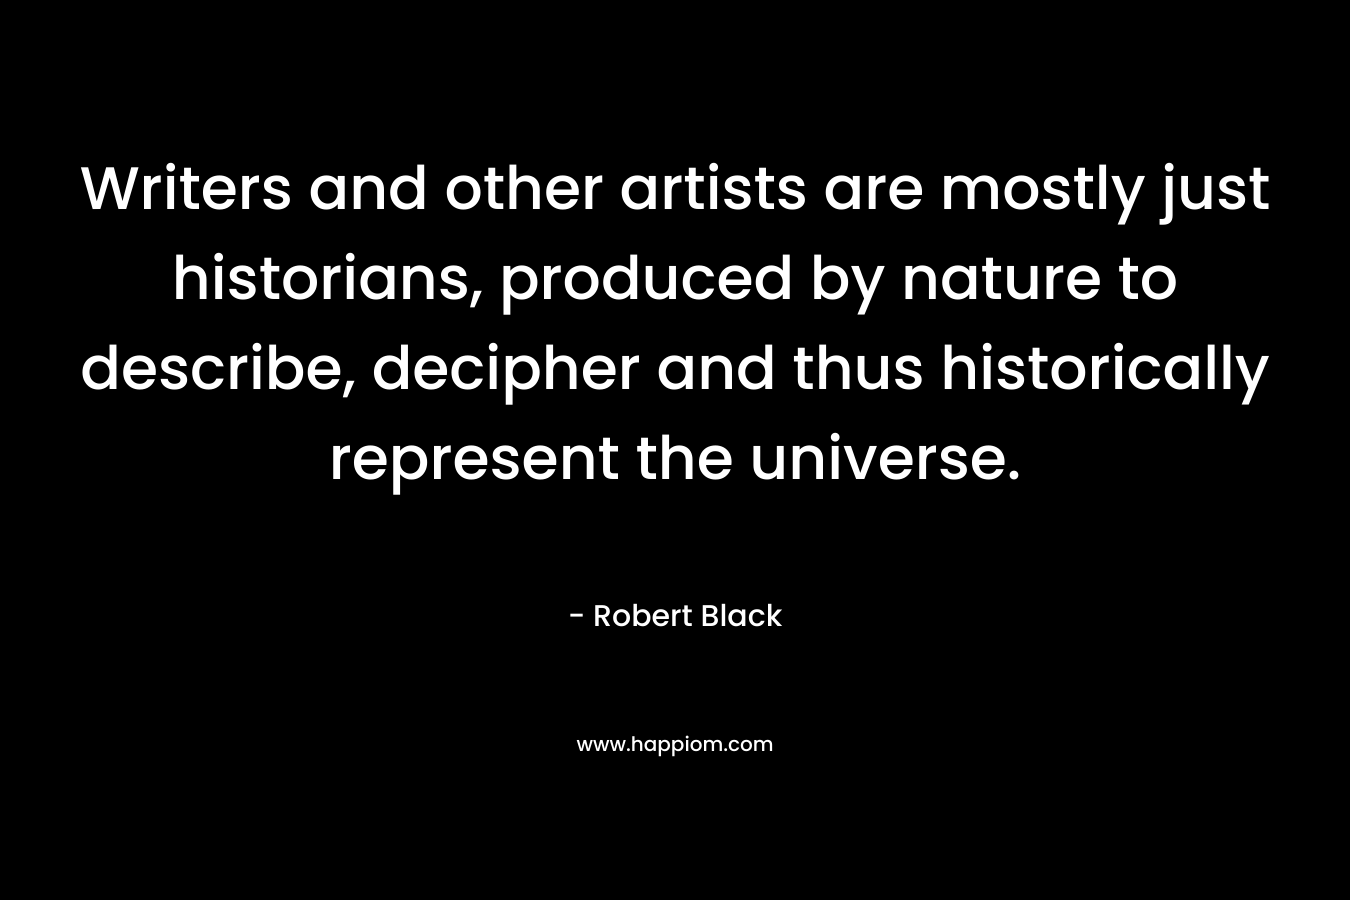 Writers and other artists are mostly just historians, produced by nature to describe, decipher and thus historically represent the universe.